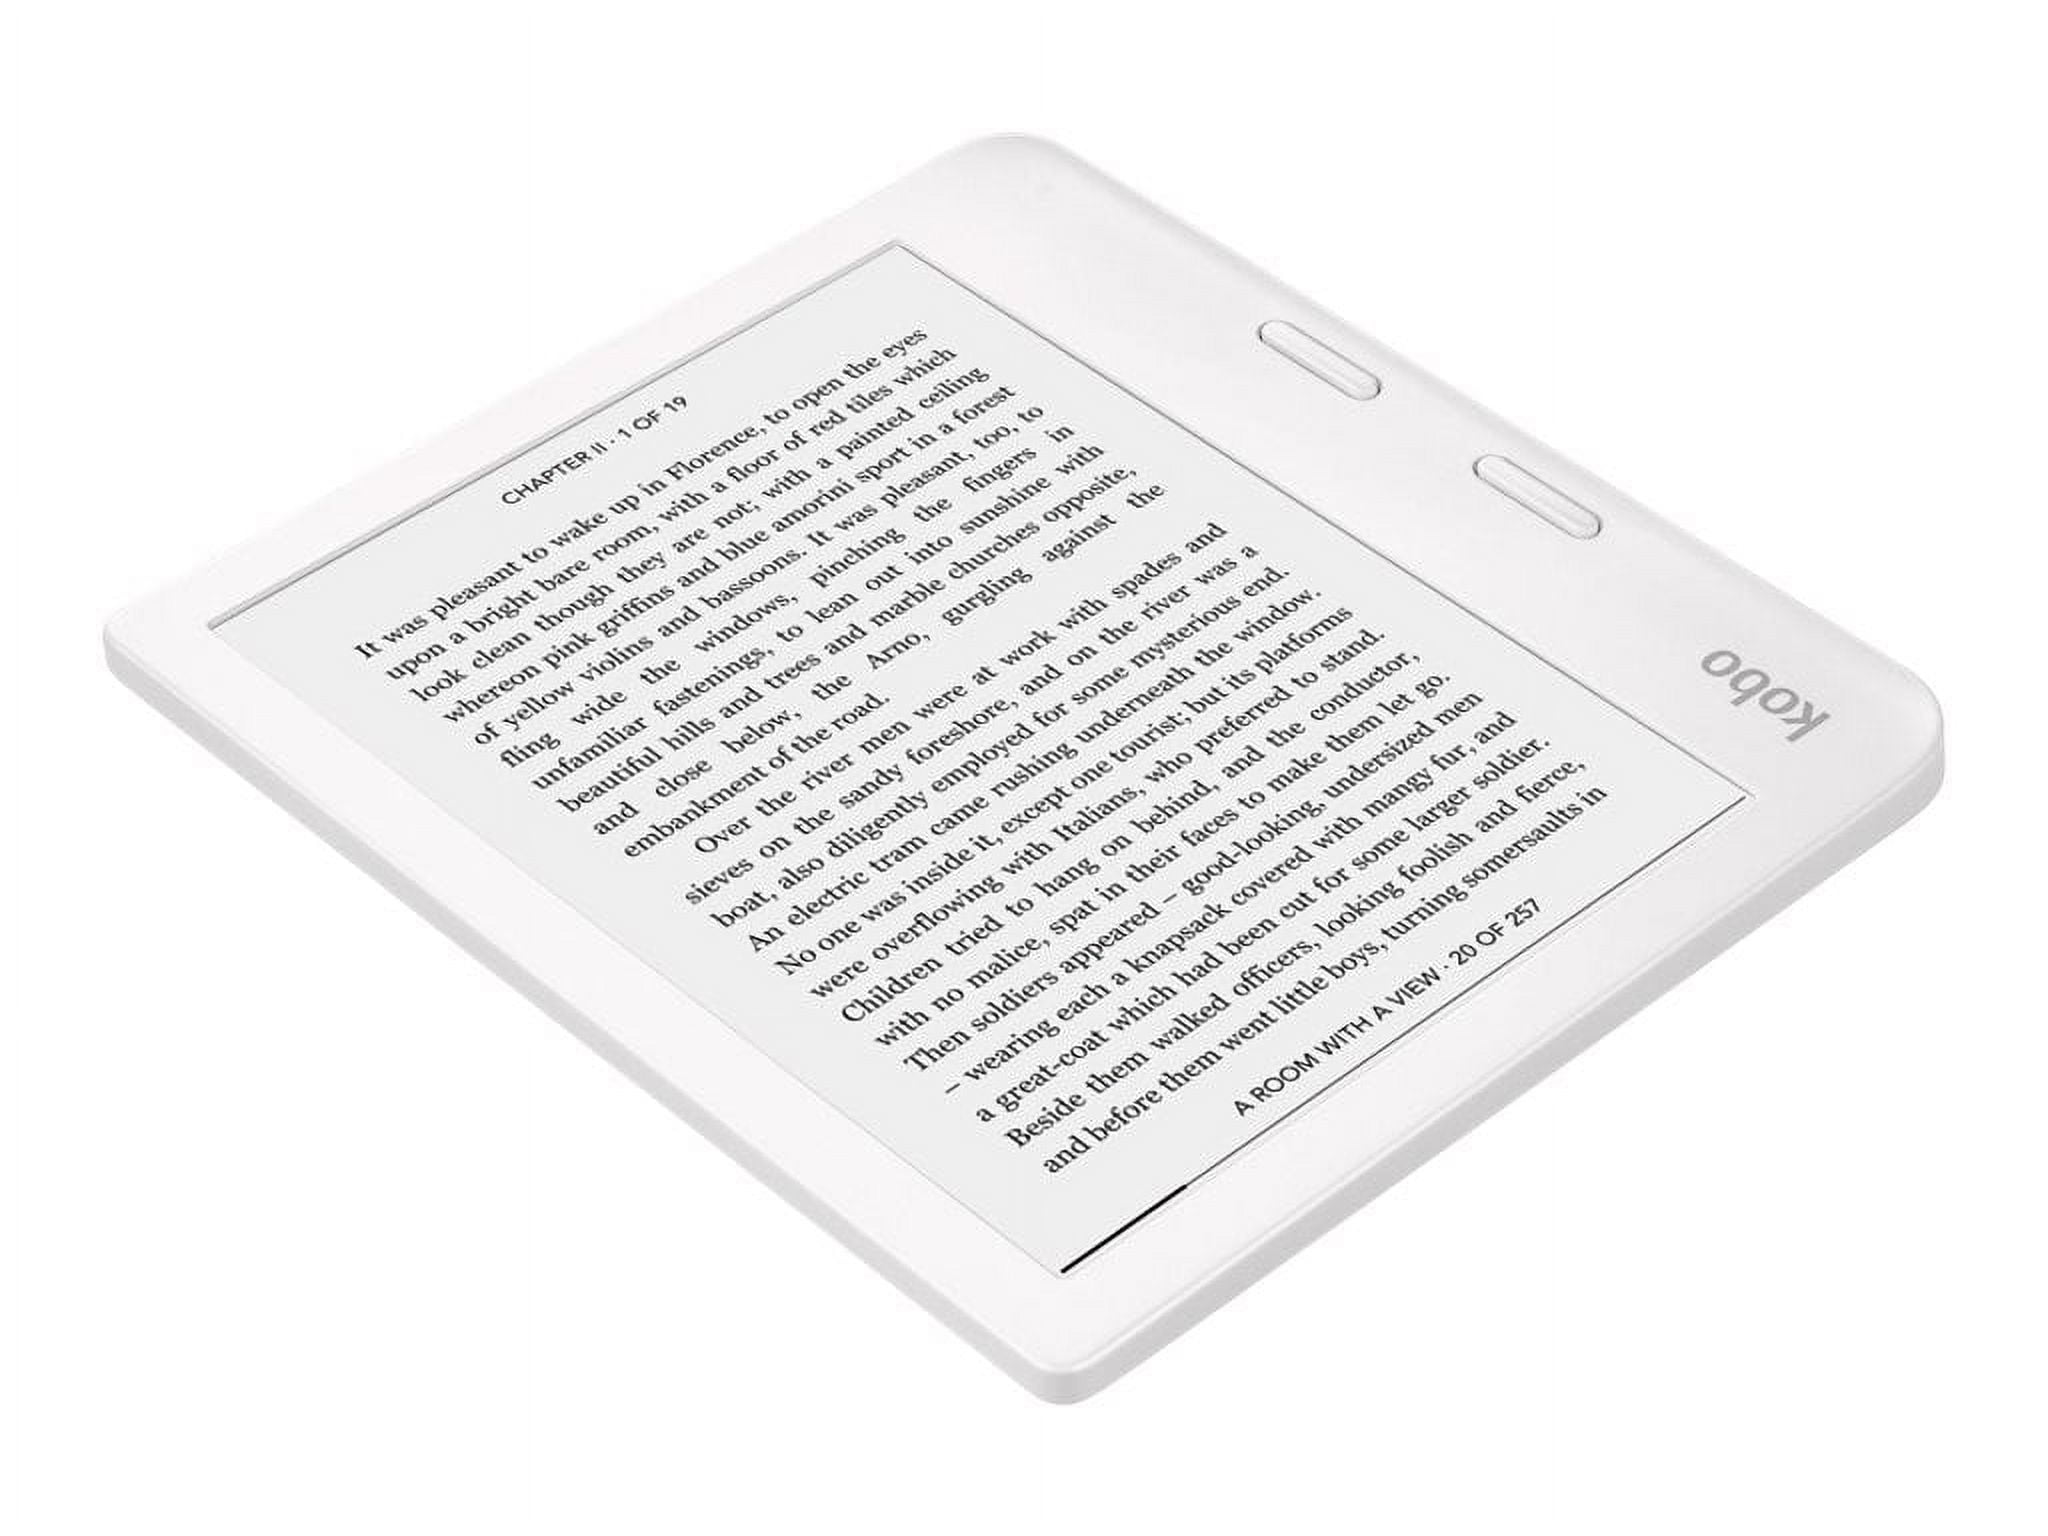 Kobo Libra 2, eReader, 7” Glare Free Touchscreen, Waterproof, Adjustable Brightness and Color Temperature, Blue Light Reduction, eBooks, WiFi, 32GB of Storage, Carta E Ink Technology